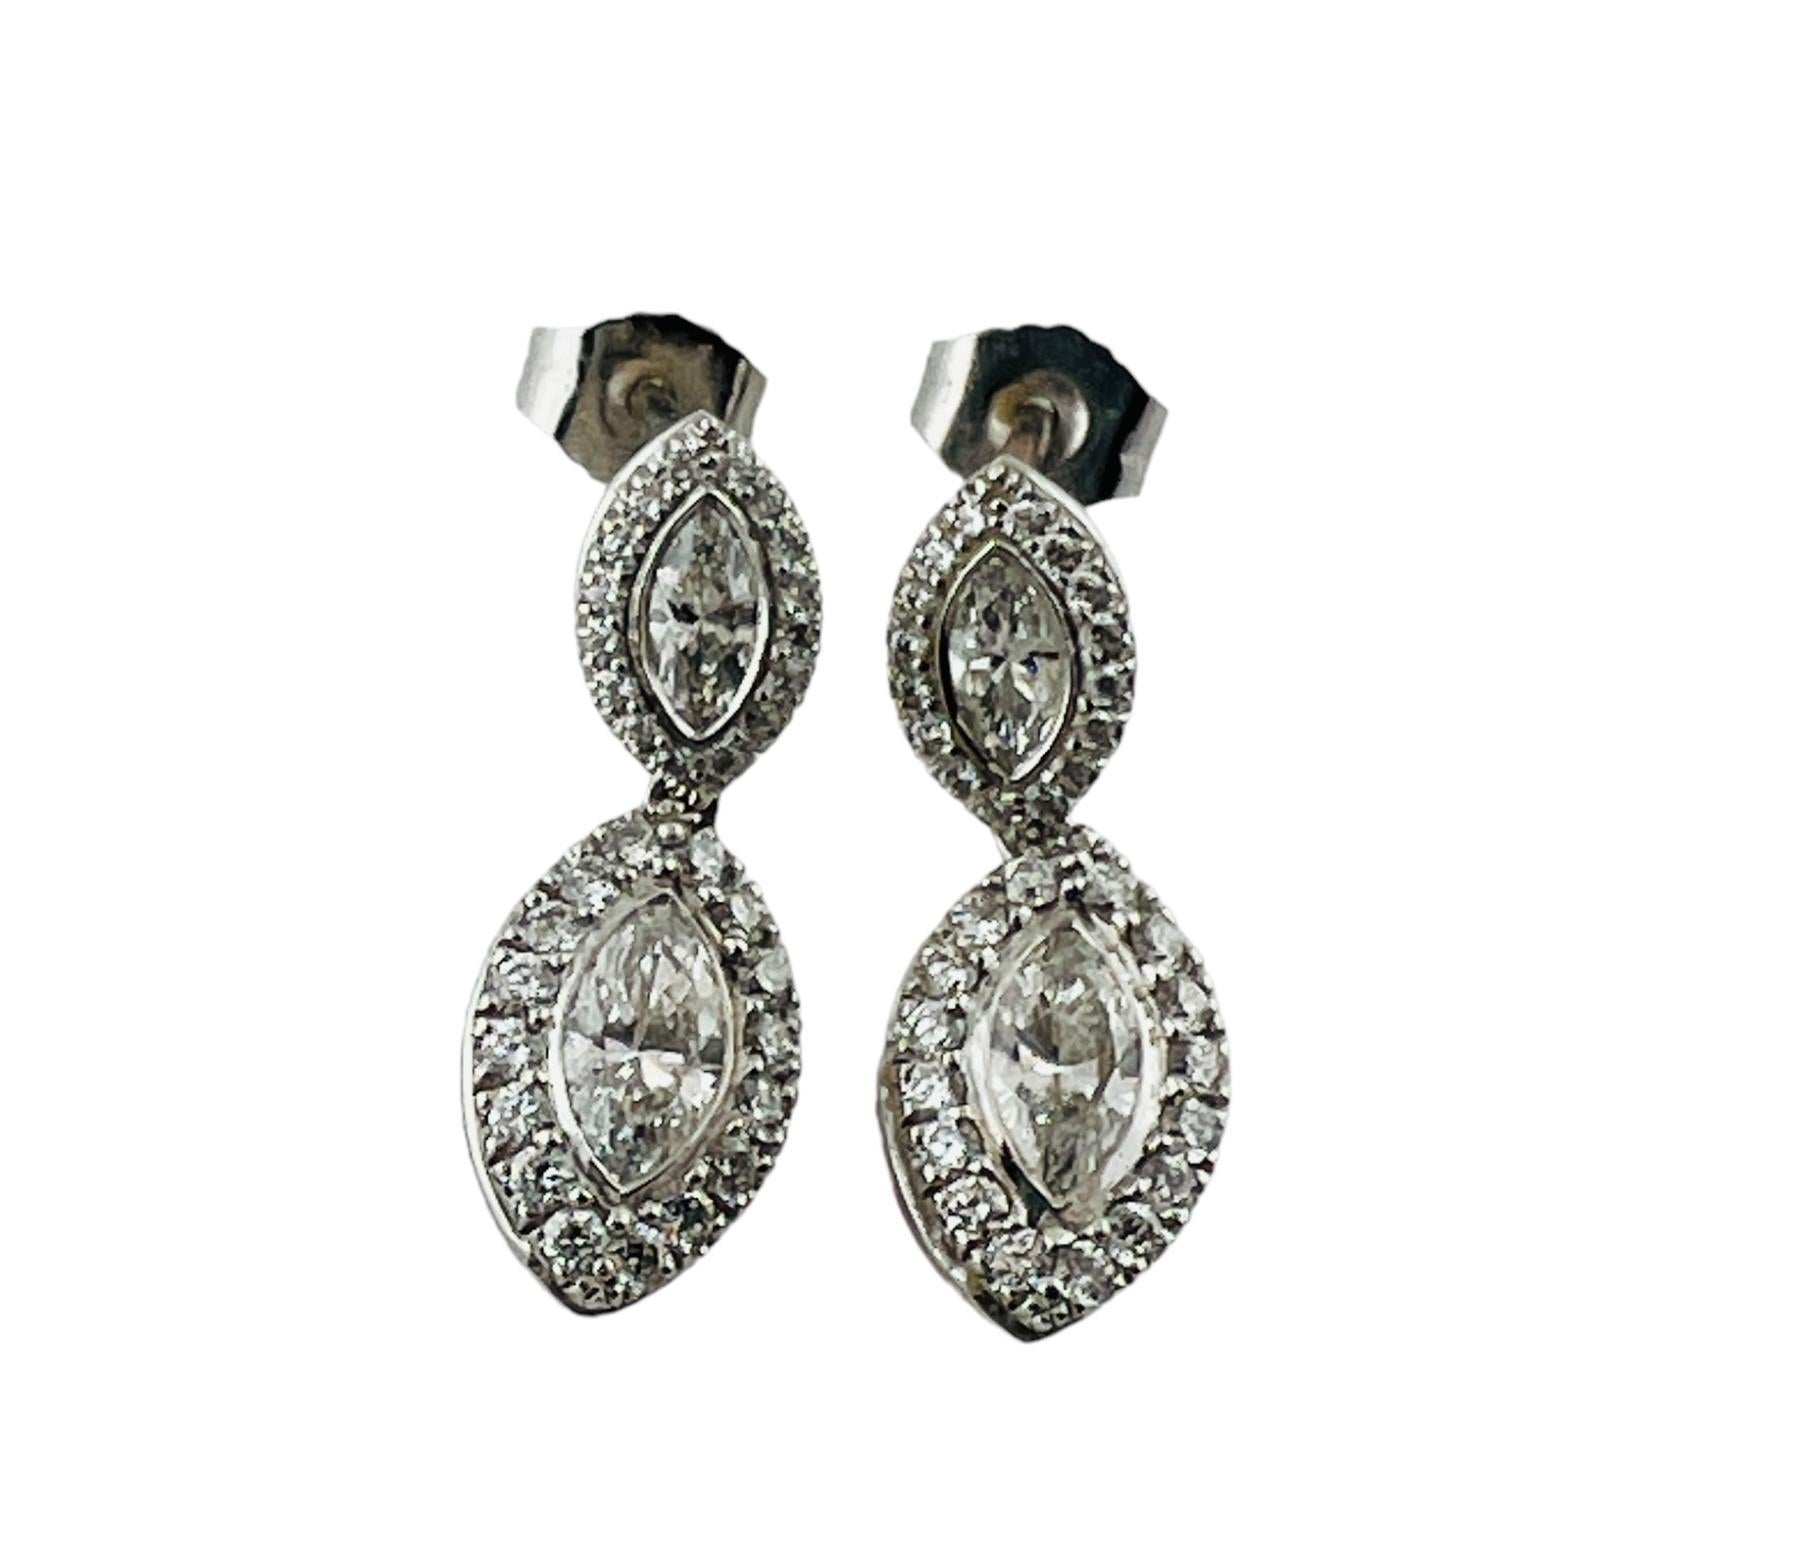 Kwait Platinum 18K White Gold Marquis Diamond Dangle Earrings #17044 In Good Condition For Sale In Washington Depot, CT